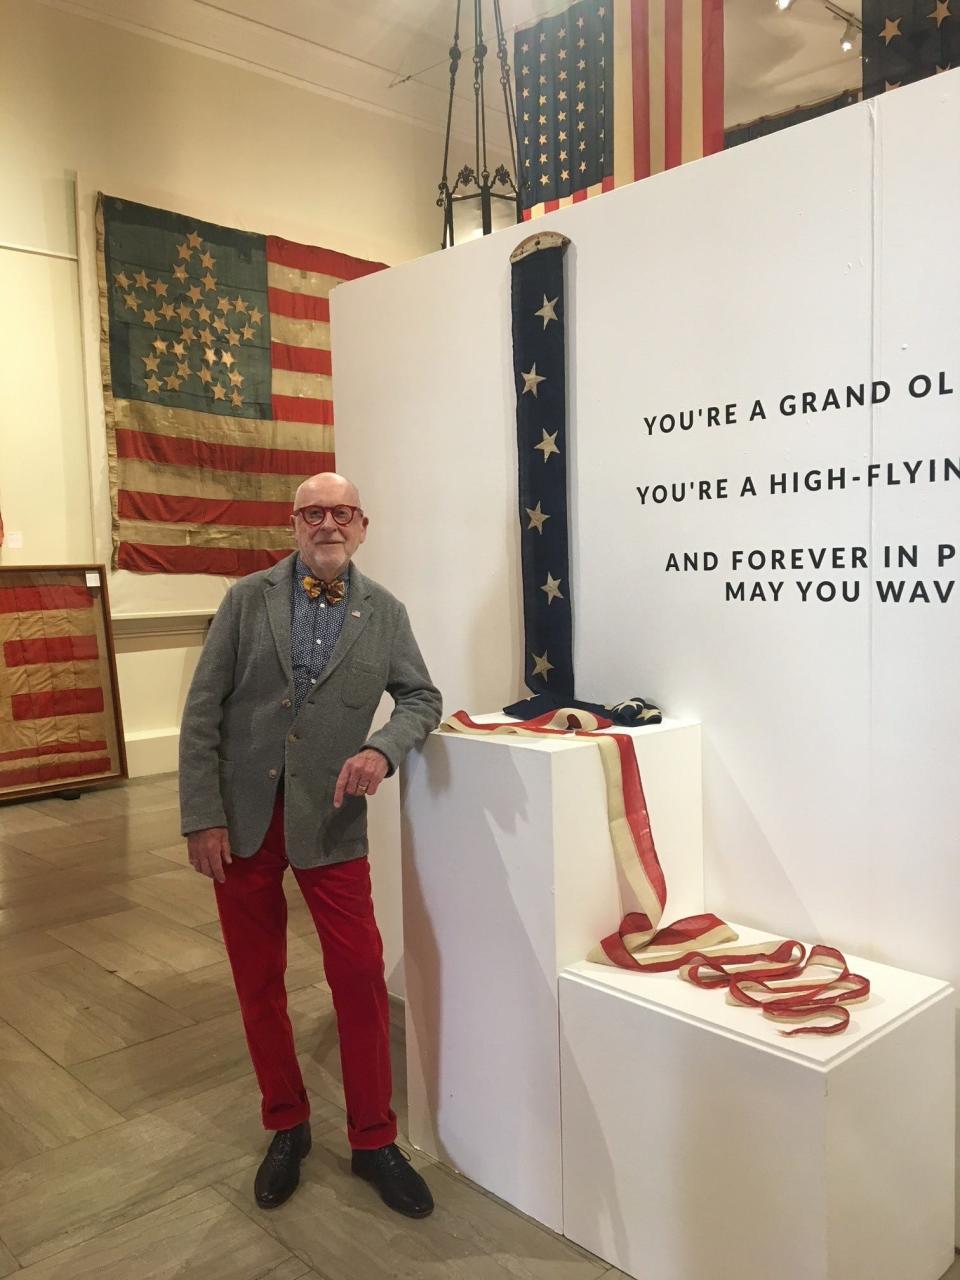 Peter Keim has a collection of more than 700 American flags started with one in a paper bag at an antique show. It grew to more than 700 items.